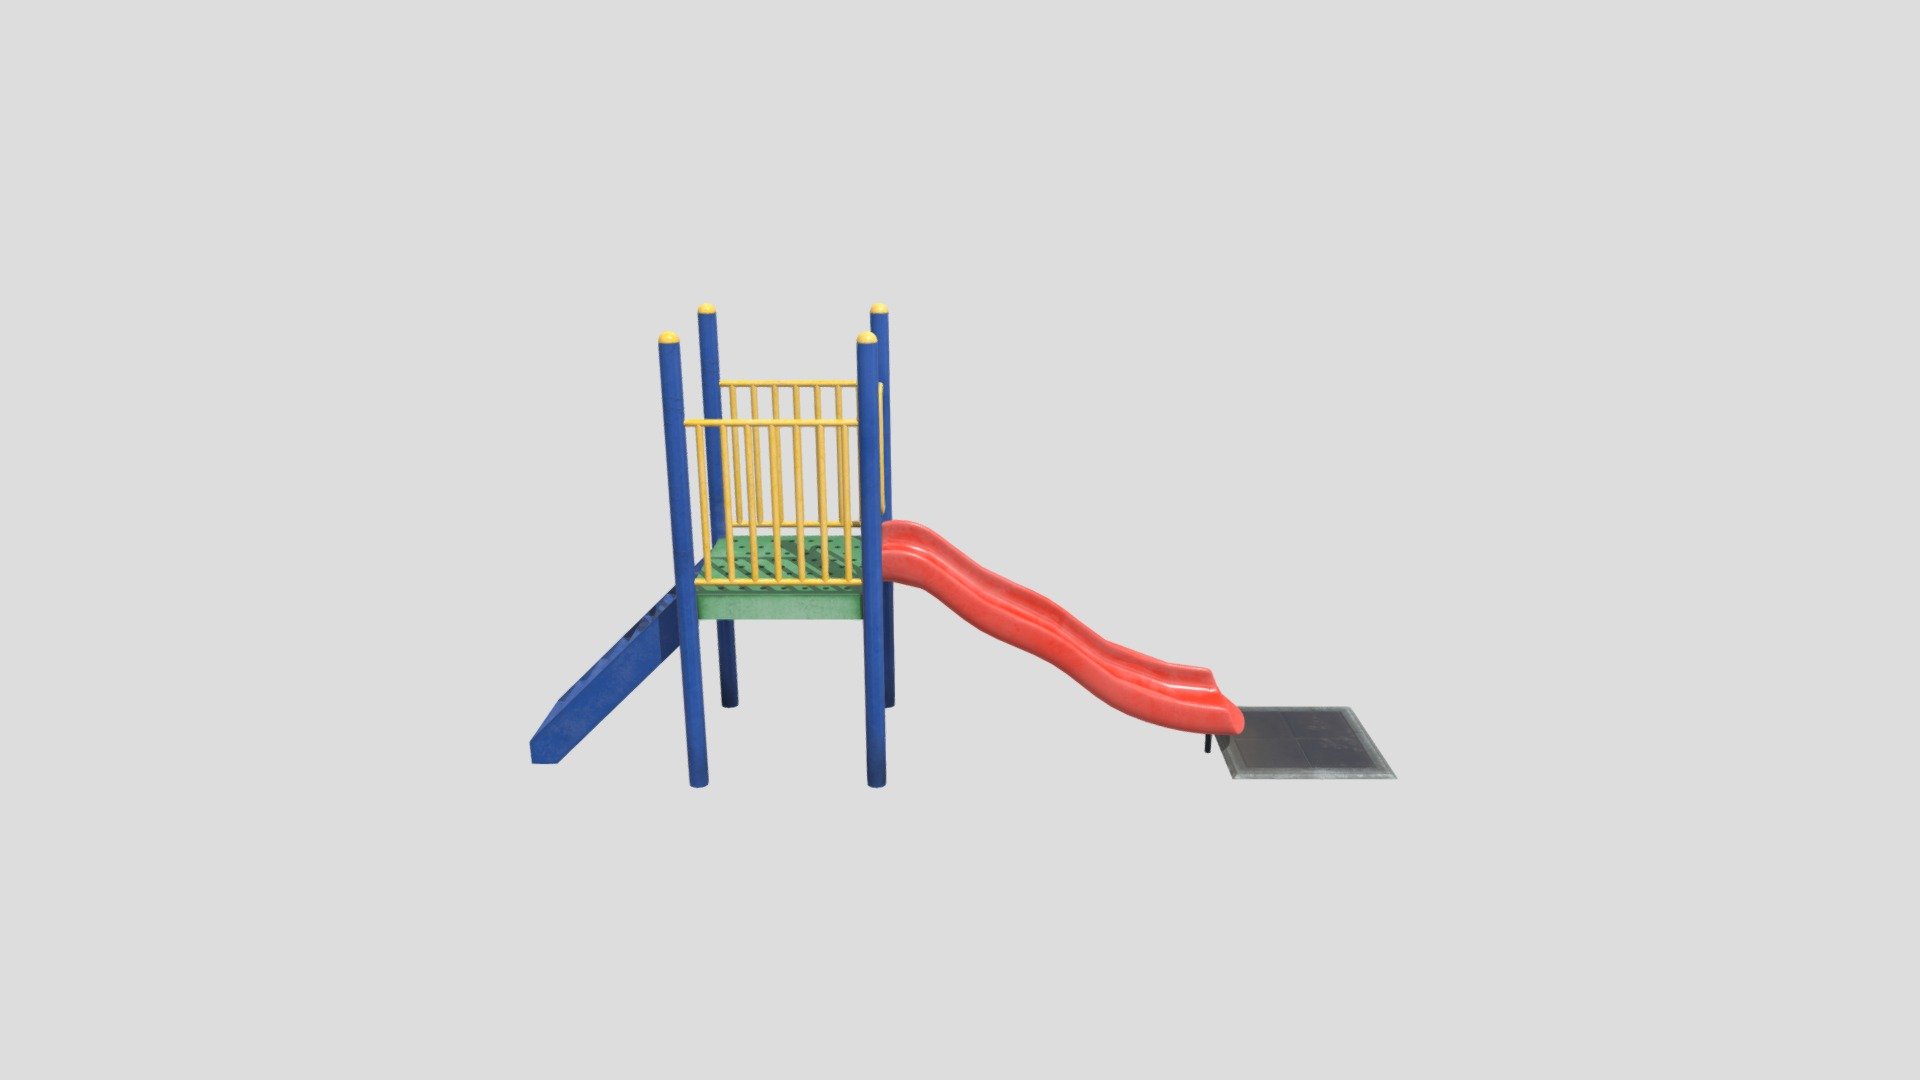 Playground Slide




Low poly model

Dimensions: 1.21m x 5.27m x 2.7m

2K PBR textureset

Containing one (1) material

4667 polygons are the sum of all the LODs

Game ready model with 3 LODs:

LOD 0: 2912 faces, 3246 vertices

LOD 1: 1126 faces, 1316 vertices

LOD 2: 629 faces, 832 vertices
 - Playground Slide - 3D model by digitalvisionartist 3d model